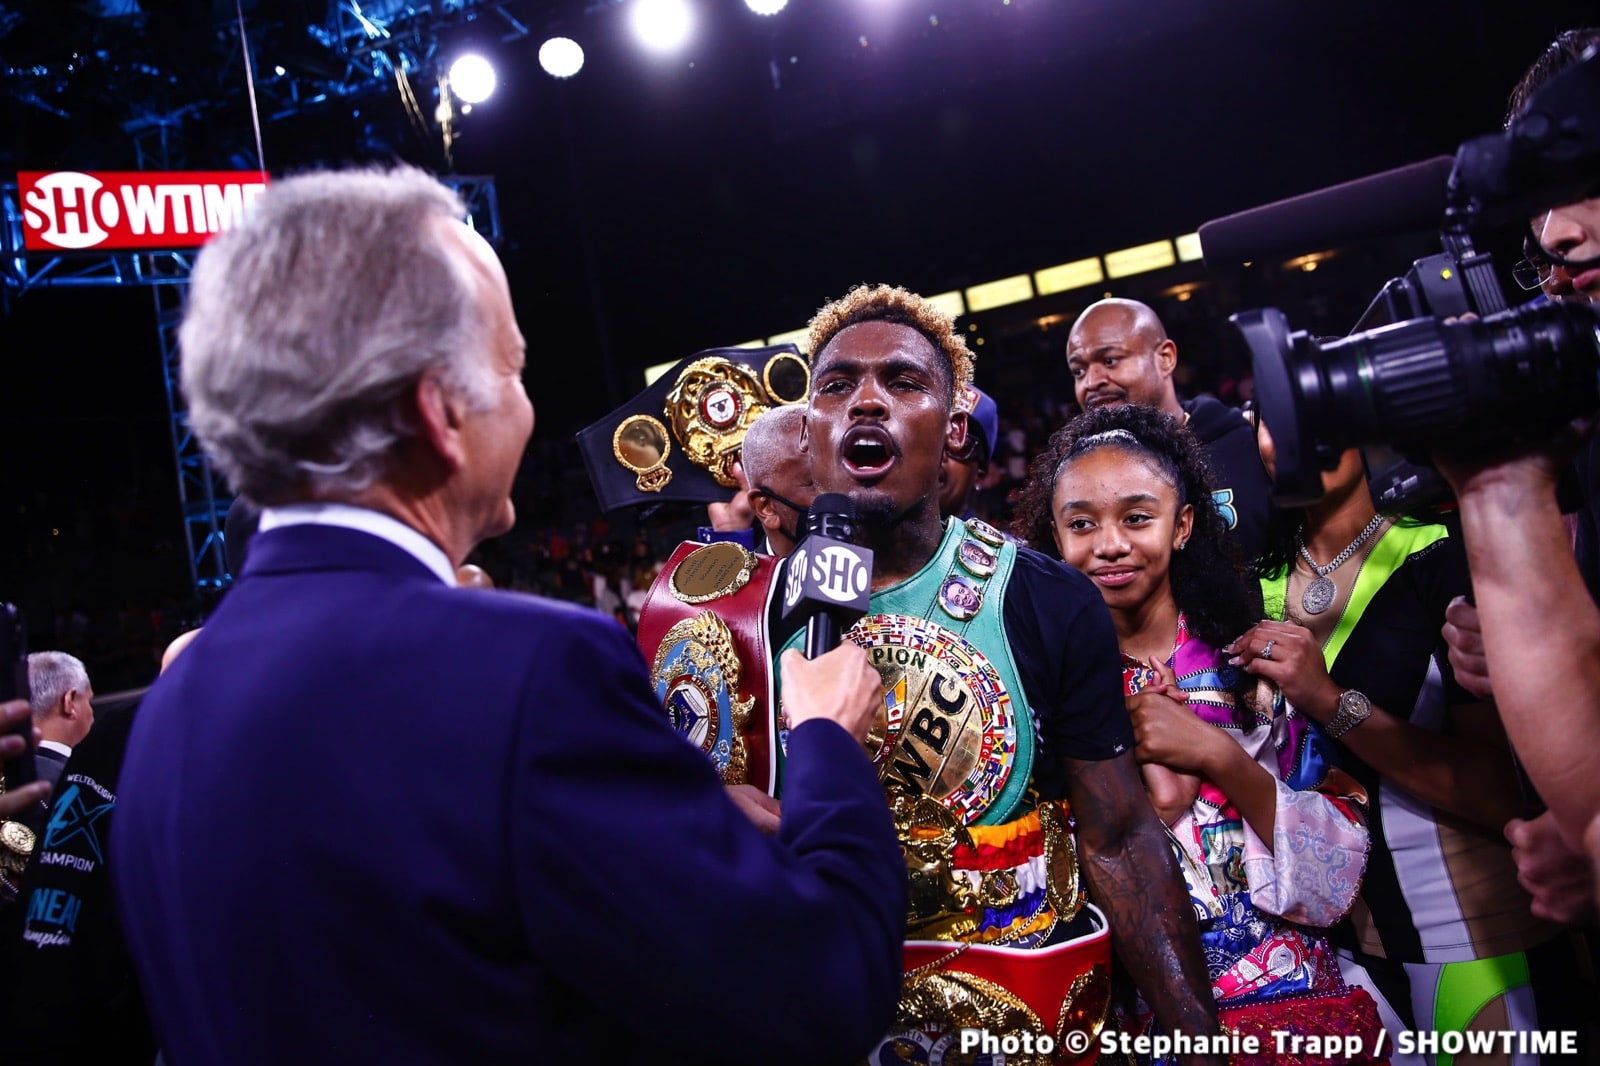 Image: Jermell Charlo to move up to 160 says Jermall